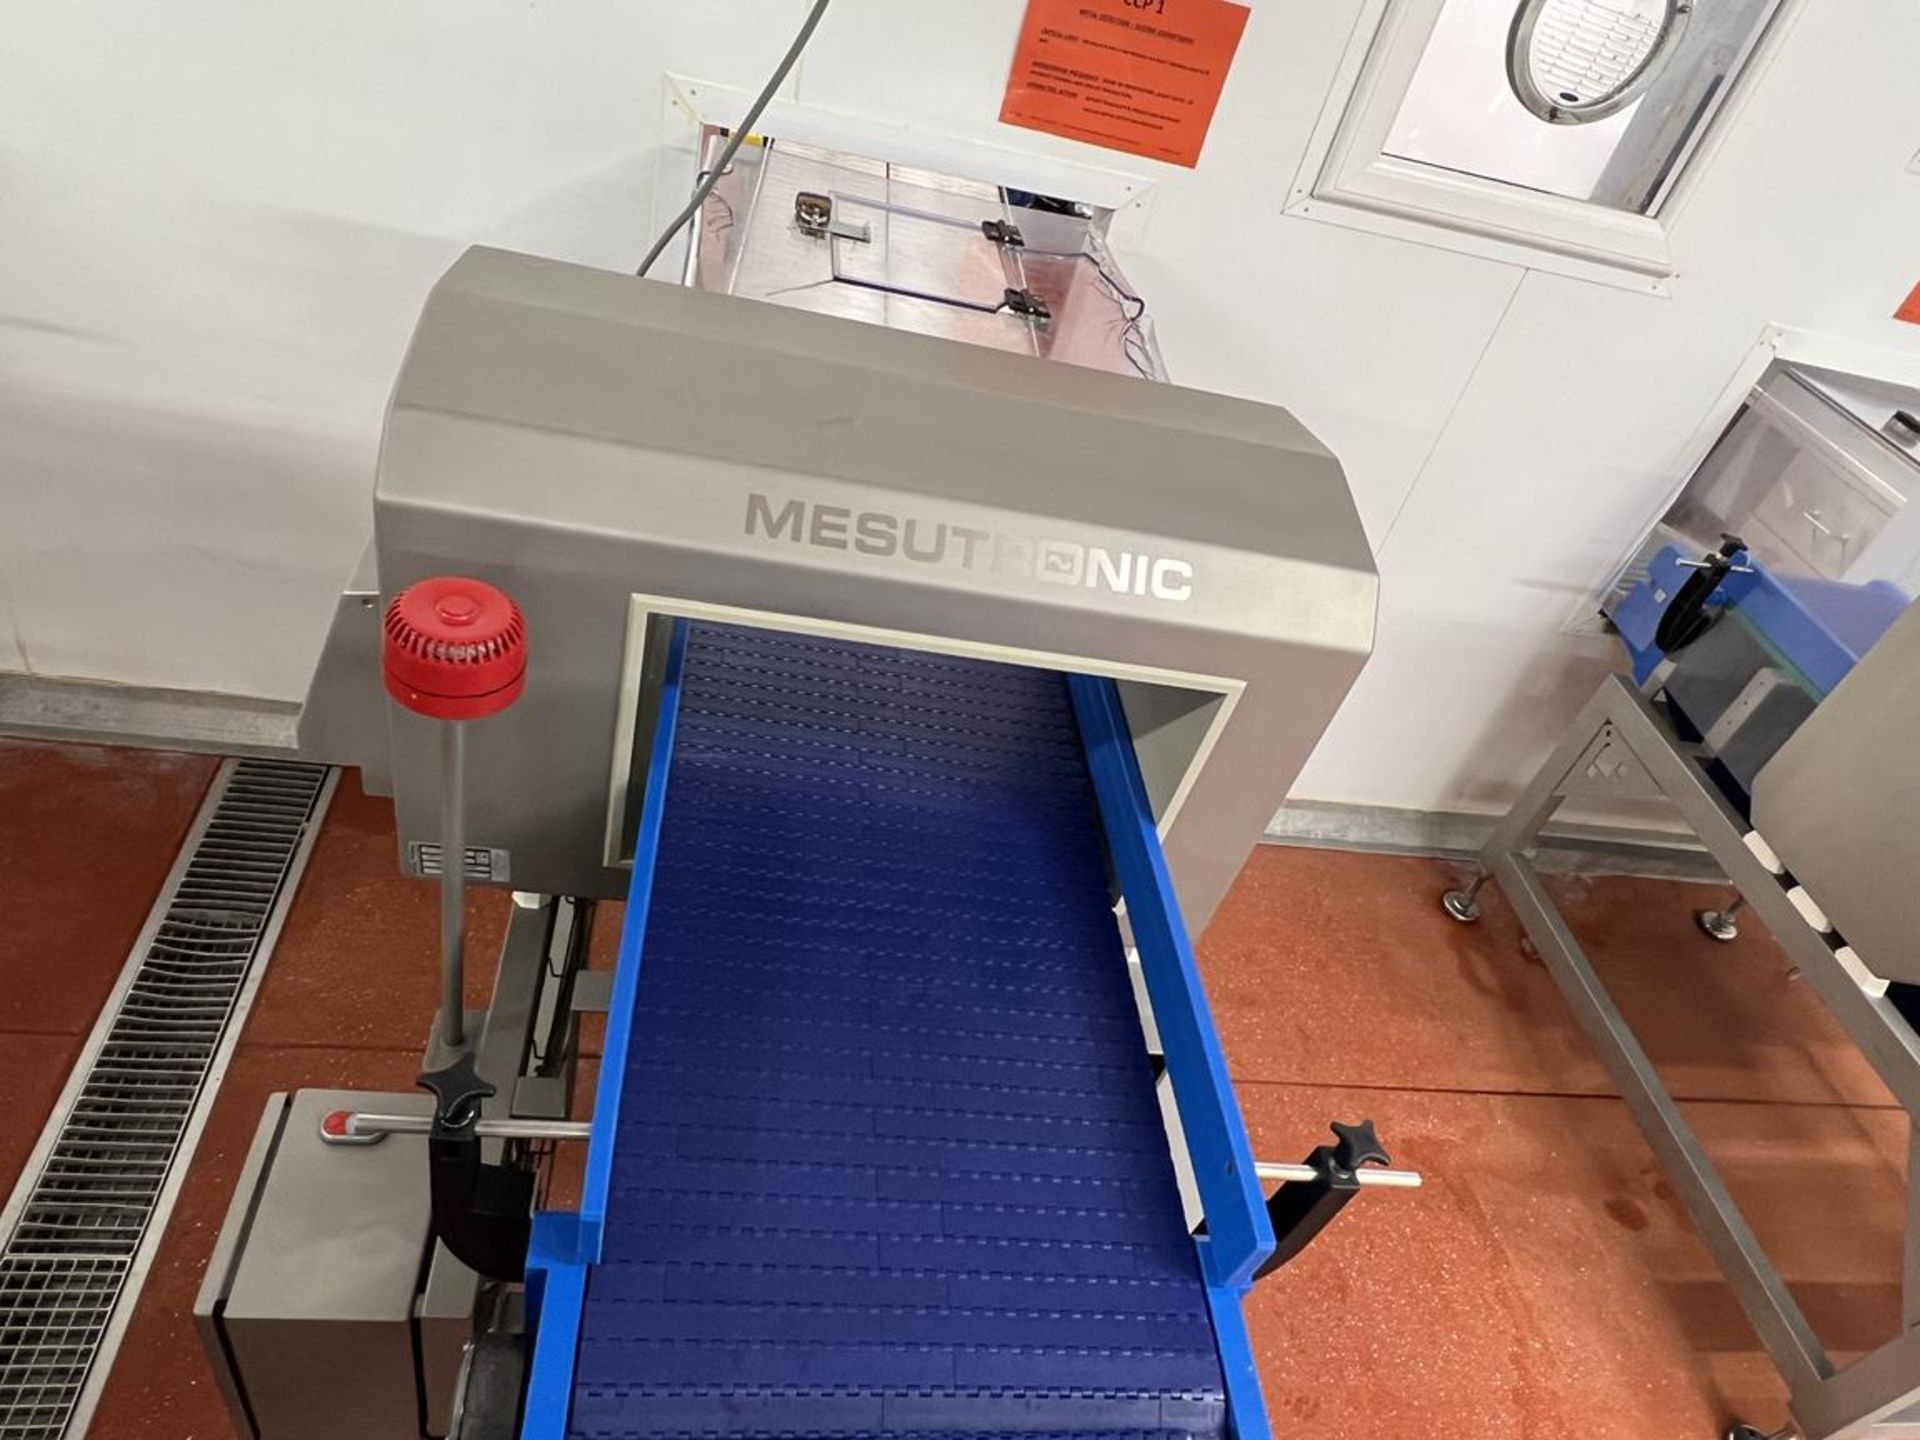 Mesutronic, MN7CI/500/300 inline conveyor fed, stainless steel tunnel metal detector, 500mm (W) x - Image 2 of 9